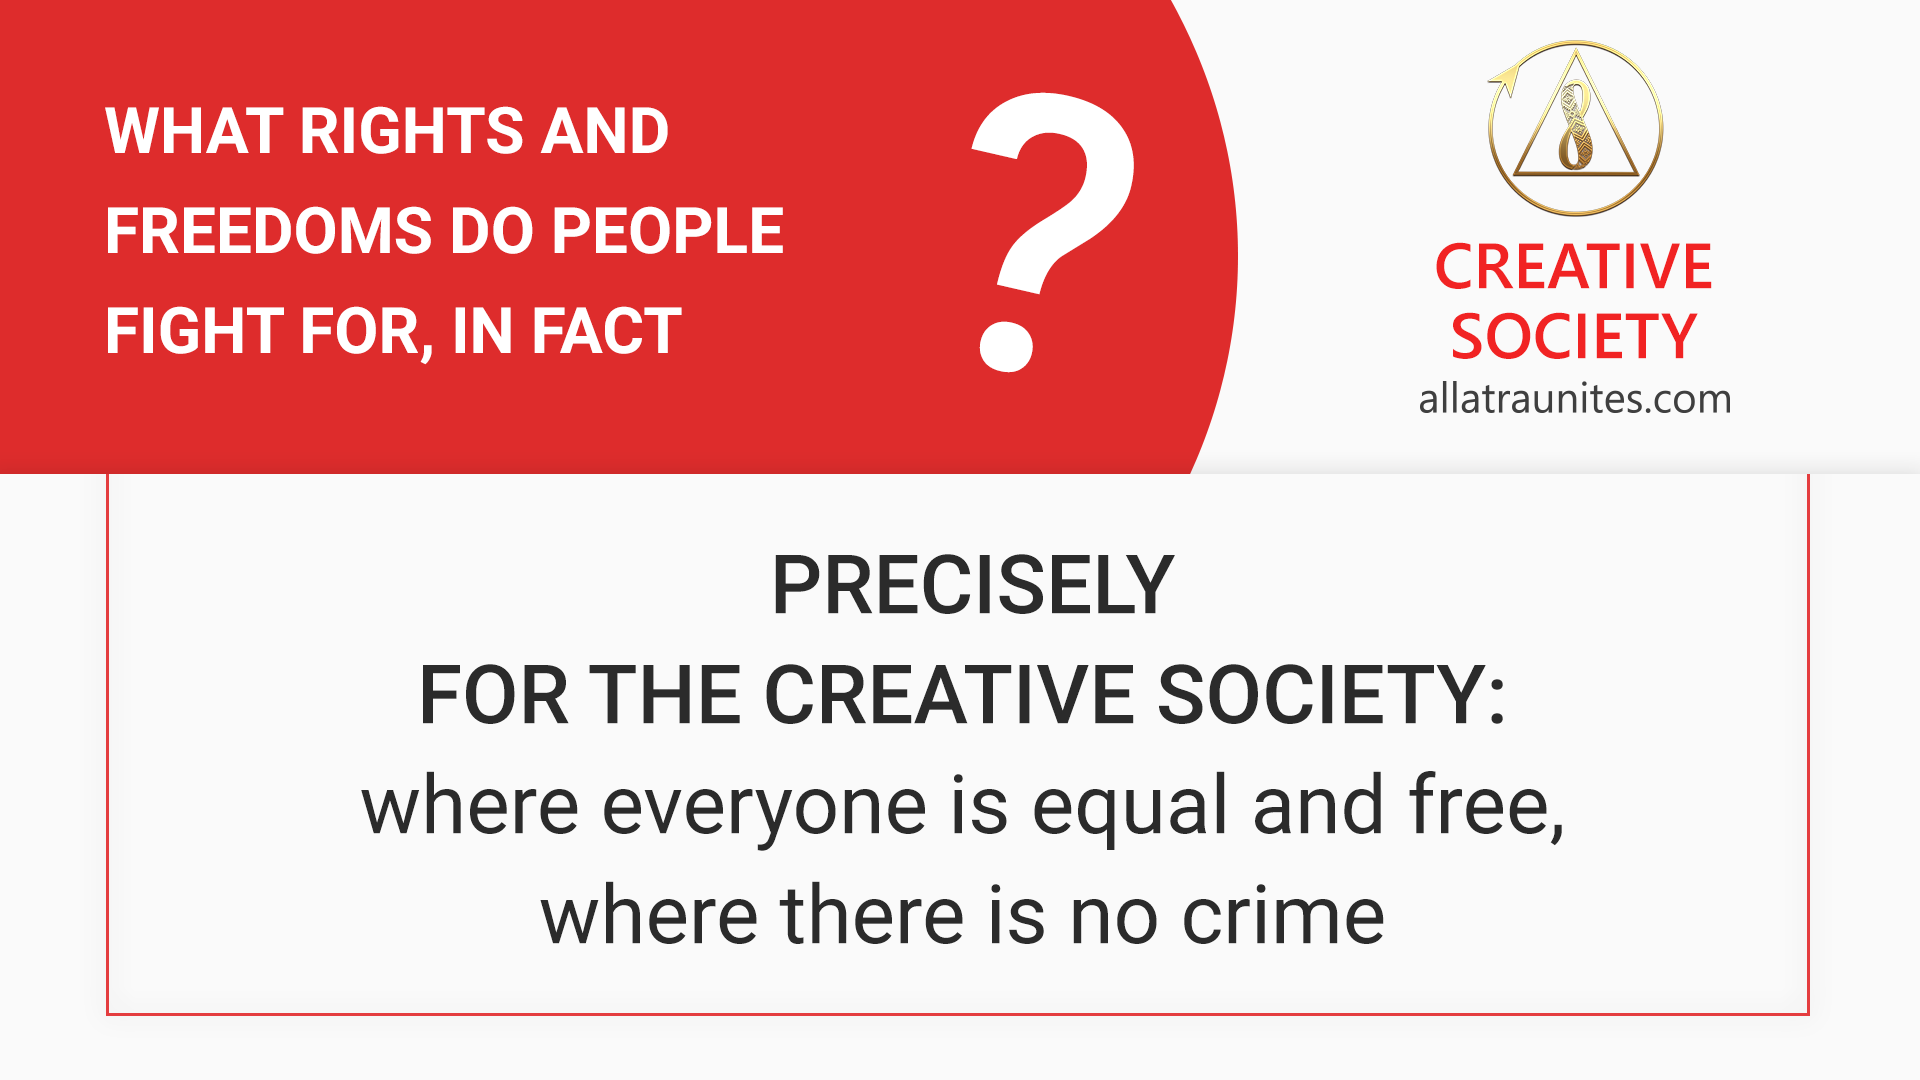 Rights and freedoms of people in the Creative Society